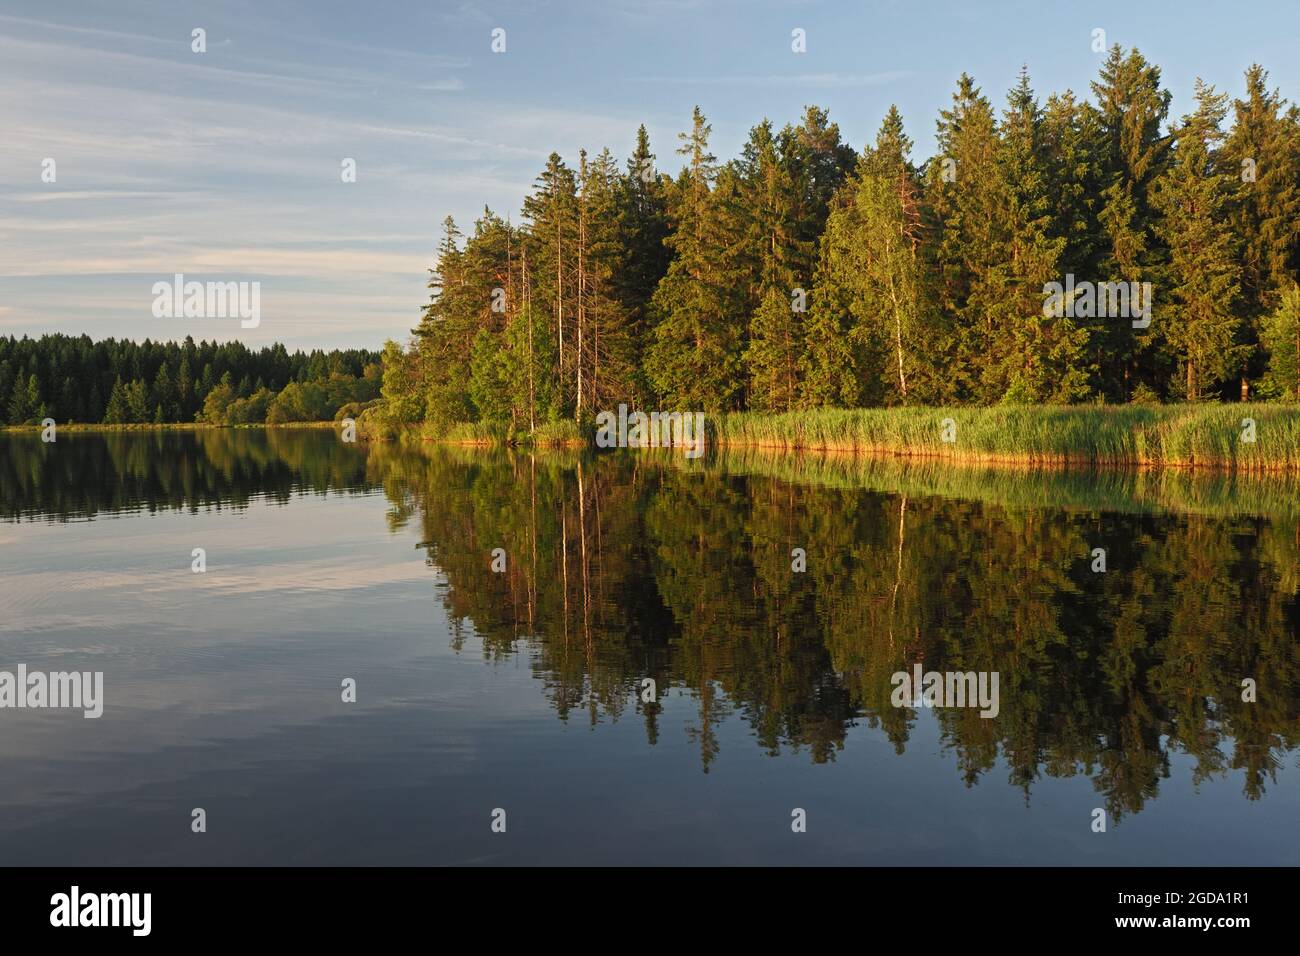 Typical Czech landscape of the Vysocina region with ponds and spruce forests Stock Photo